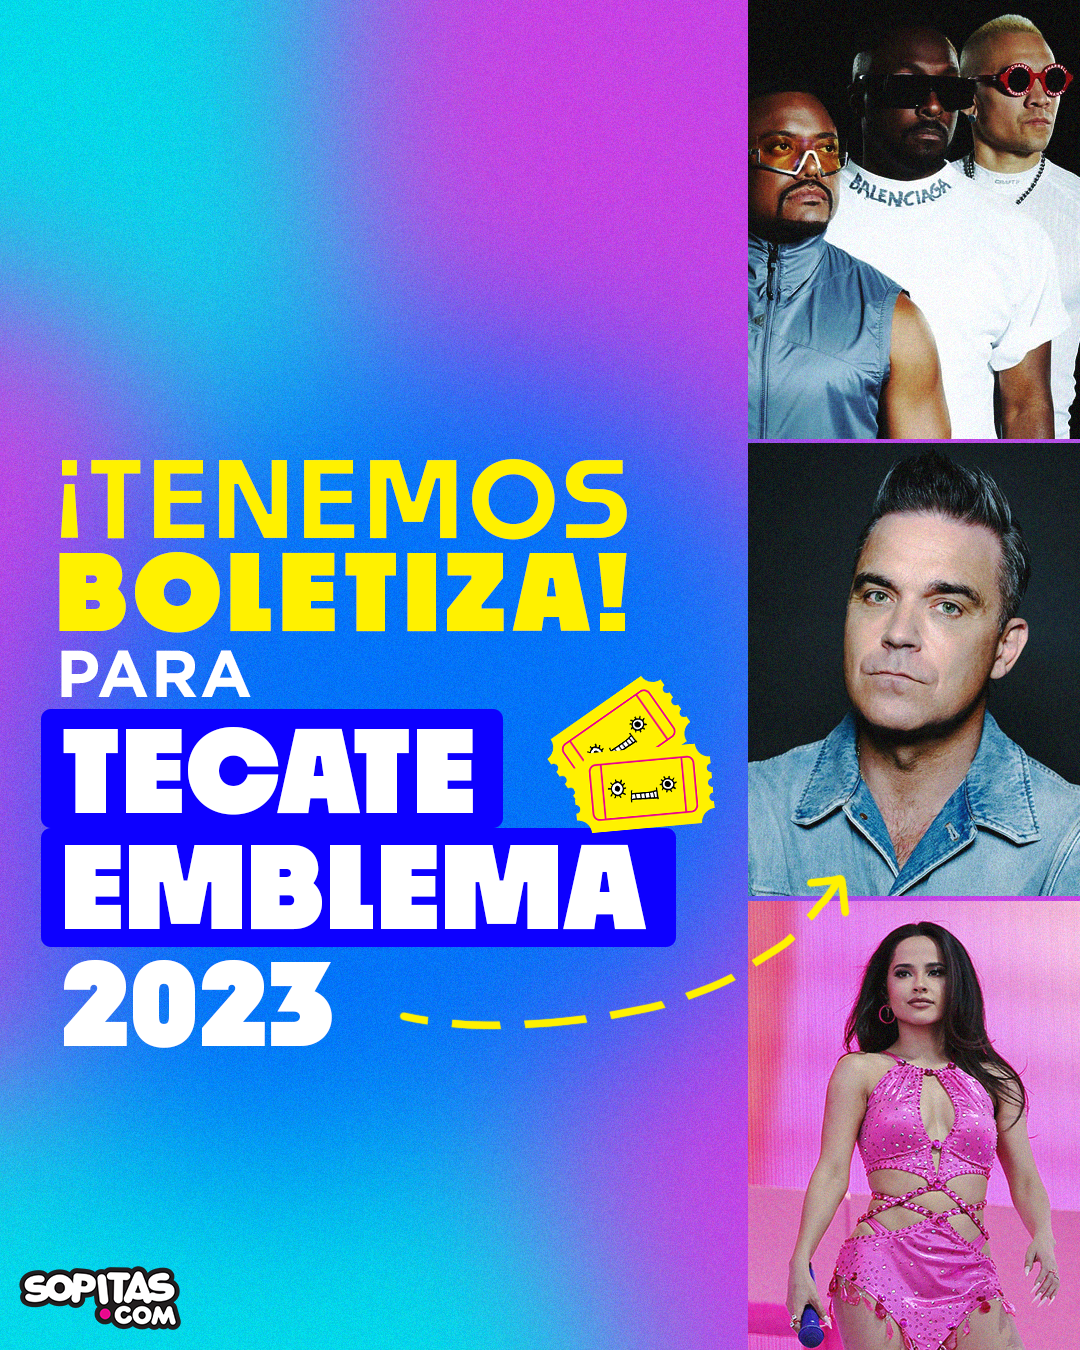 Let the ticket form for the Tecate Emblema 2023!